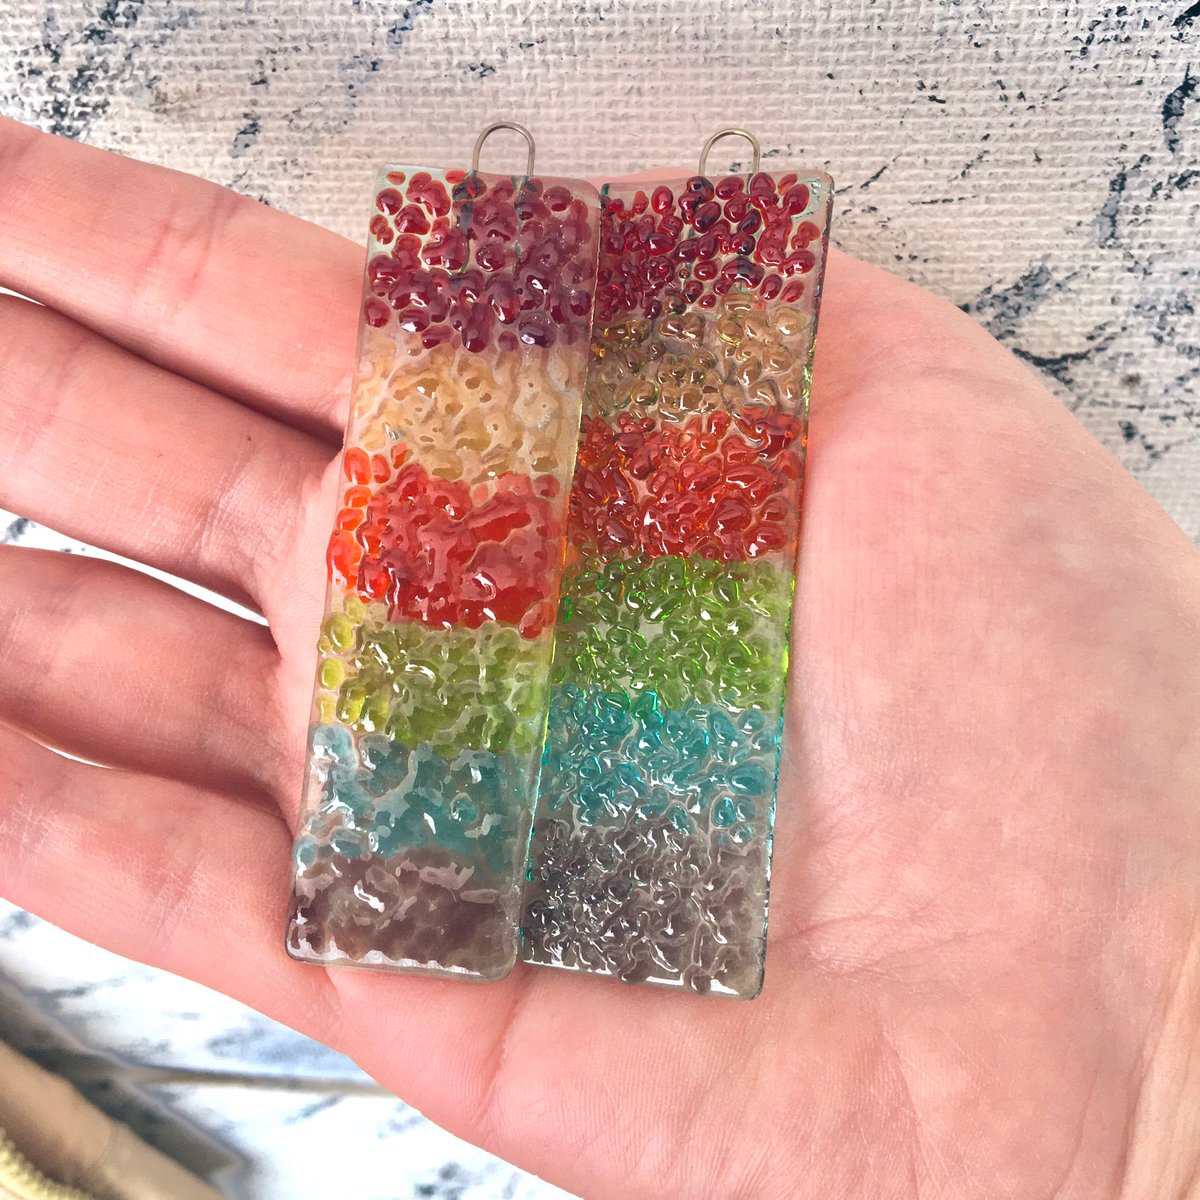 Look what I finished making this week. Some new rainbow suncatchers 😍🌈 Only thing is i put the orange & yellow round the wrong way 🤣 #ukgiftam #handmade #homedecor